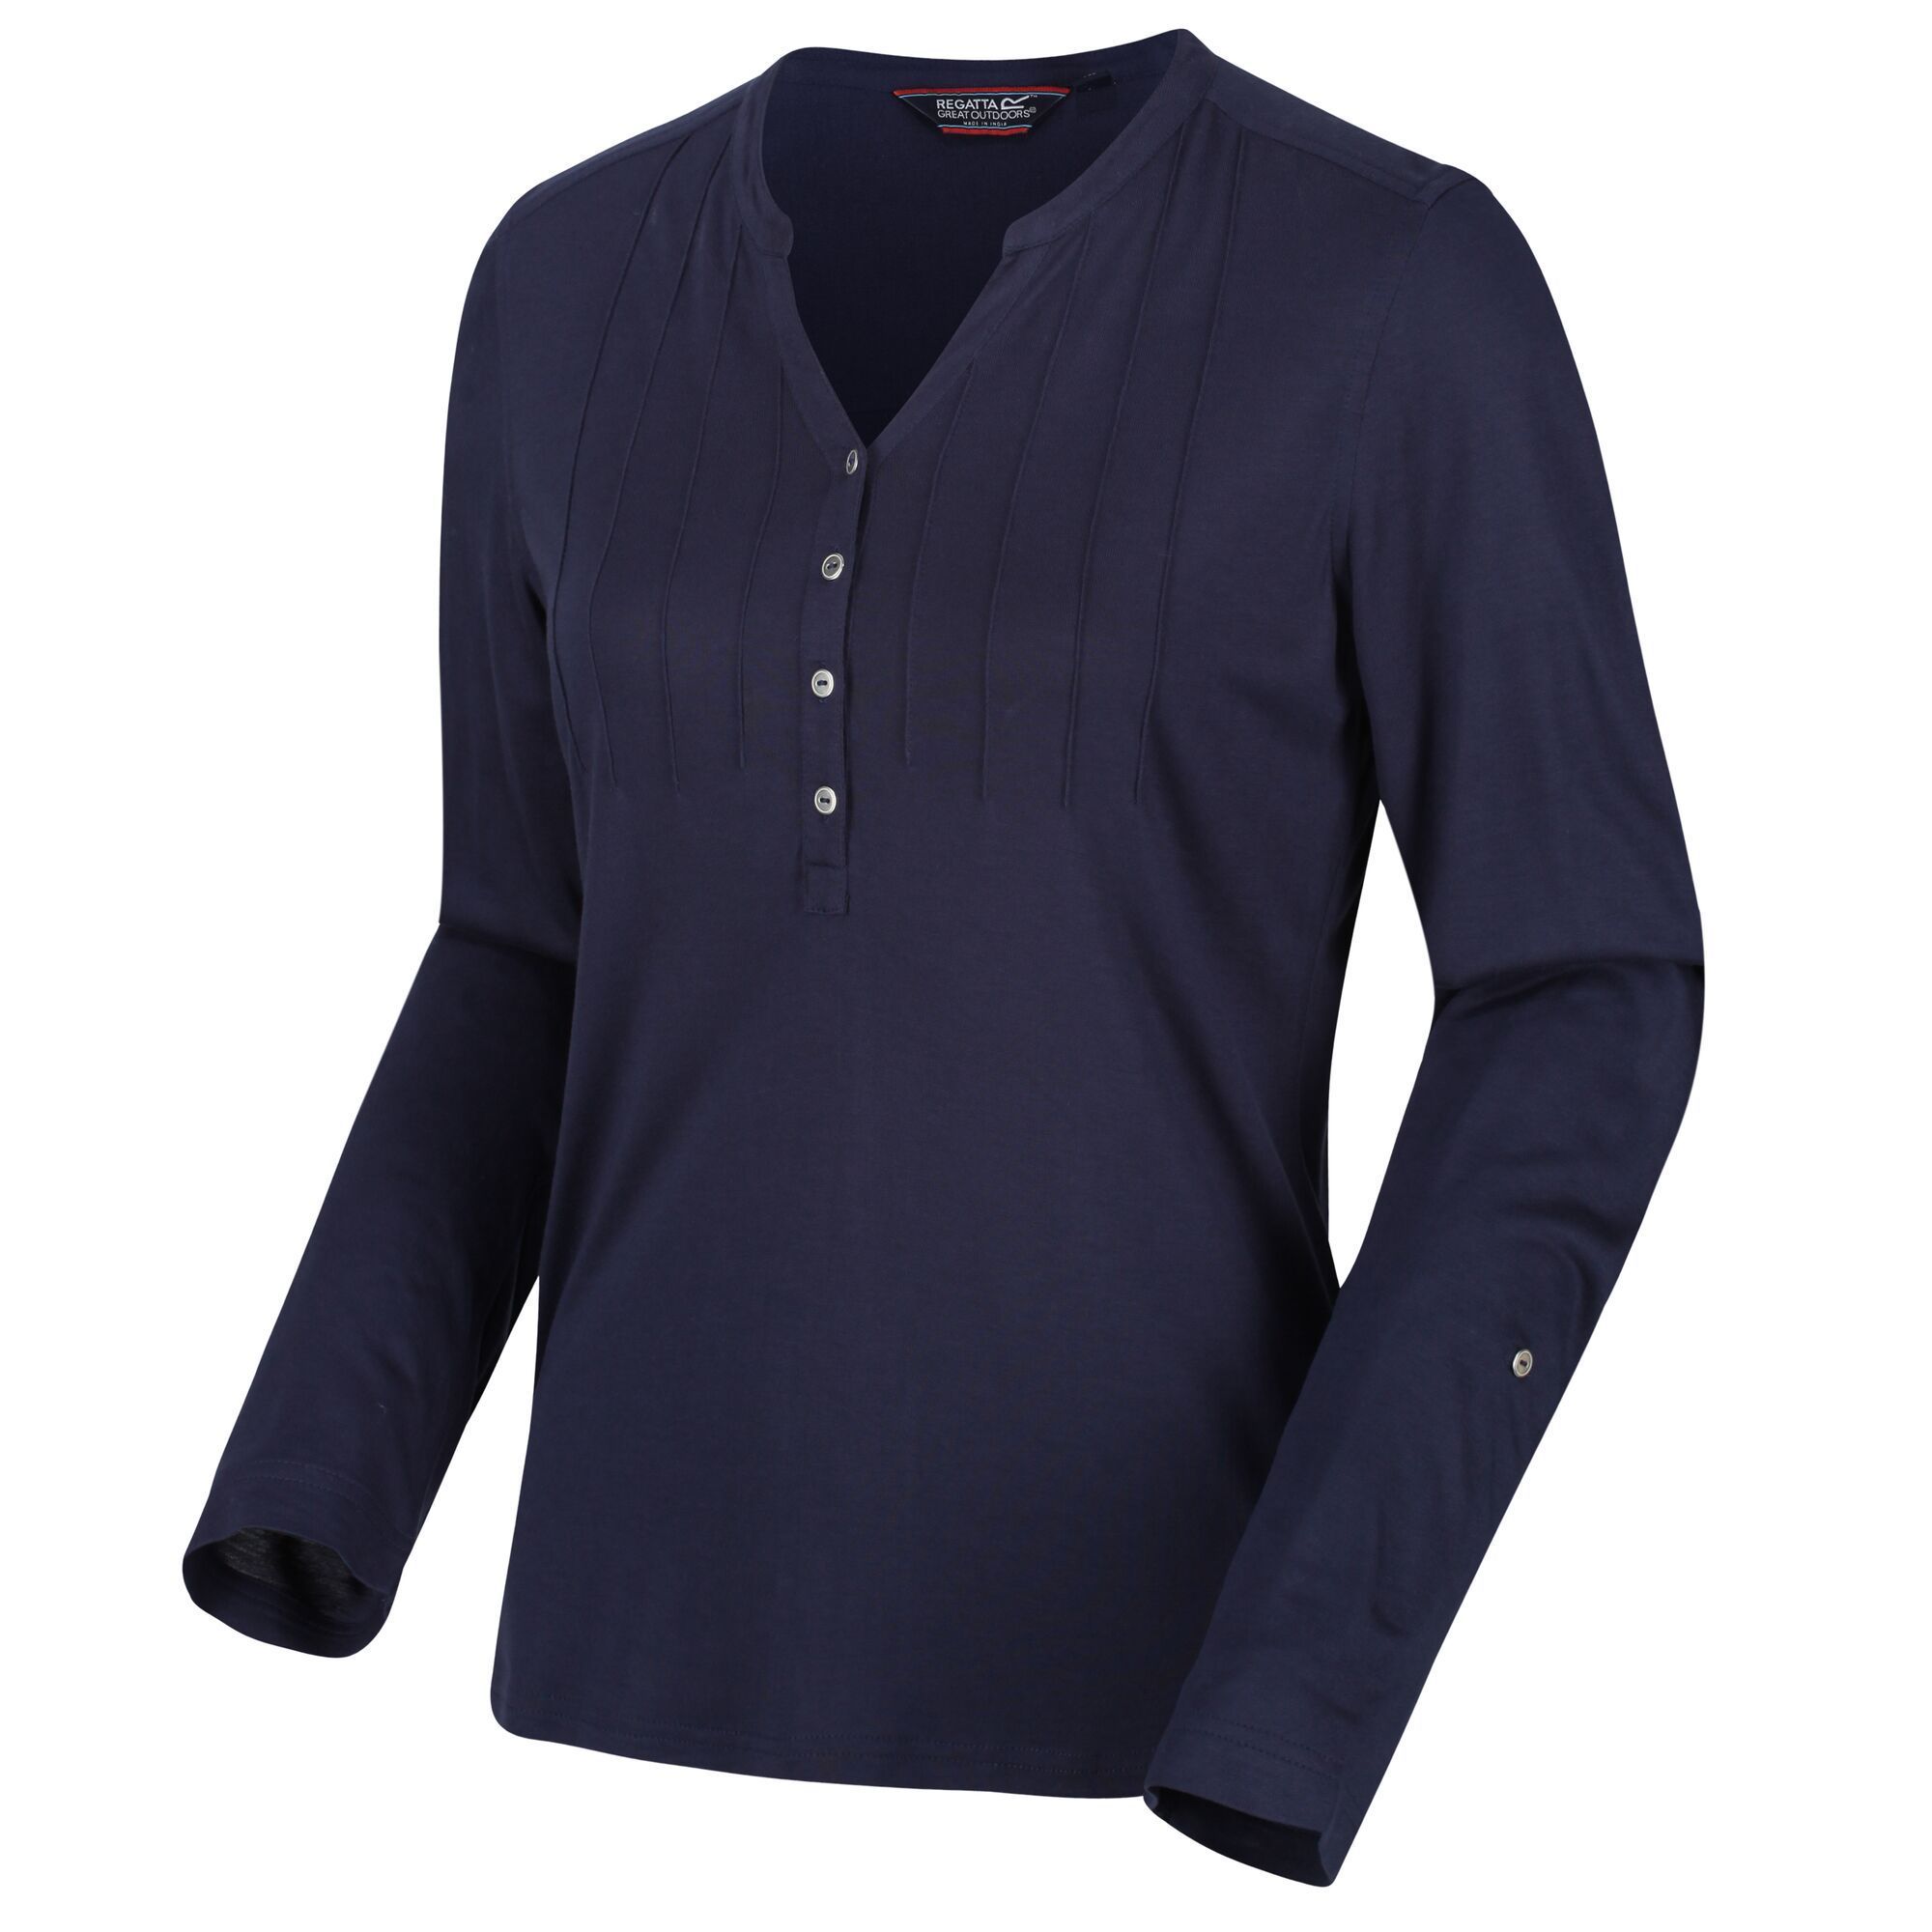 Material: 100% Viscose jersey fabric. 4 button narrow placket with high shine metal buttons. Roll up sleeves with button tab.